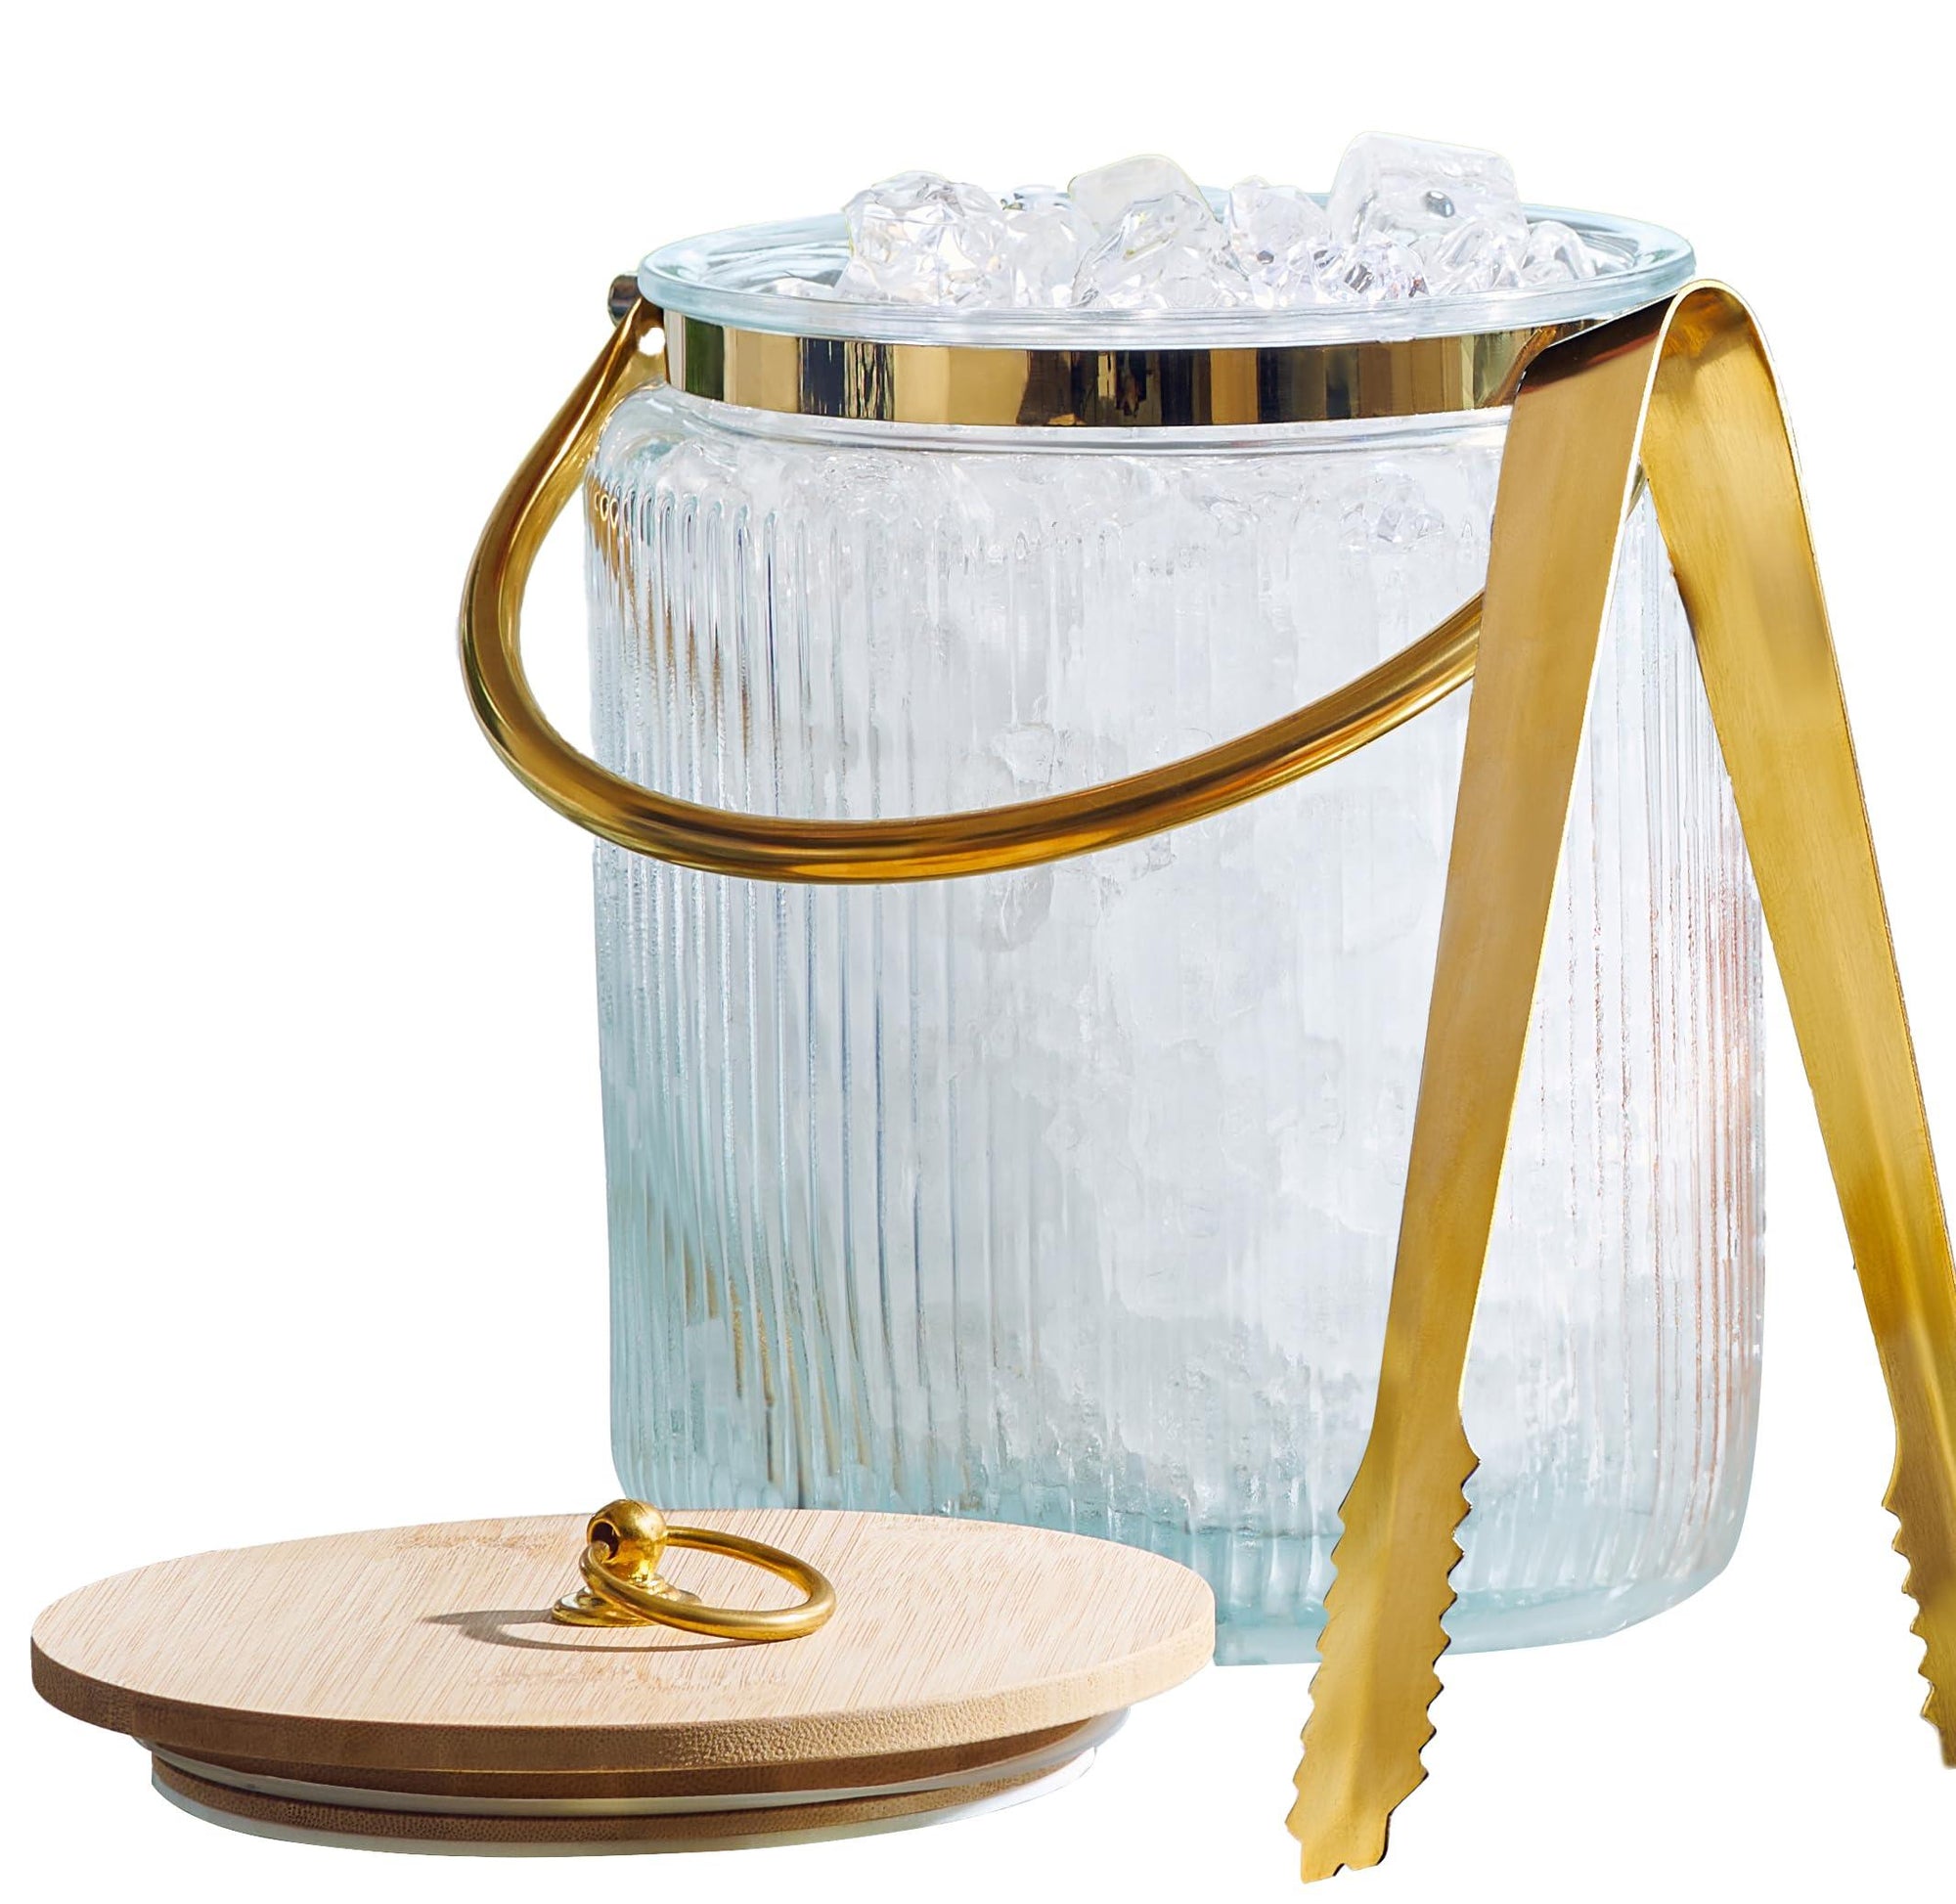 Glass Ice Bucket with Airtight Lid, Ice Tong Scooper and Handle - 3L Ribbed Beverage Tub Cocktail Home Bar Accessories, Wine, Beer - Chiller for Parties, Champagne Drink Tub Cooler with Hinged Handles - Le'raze by G&L Decor Inc